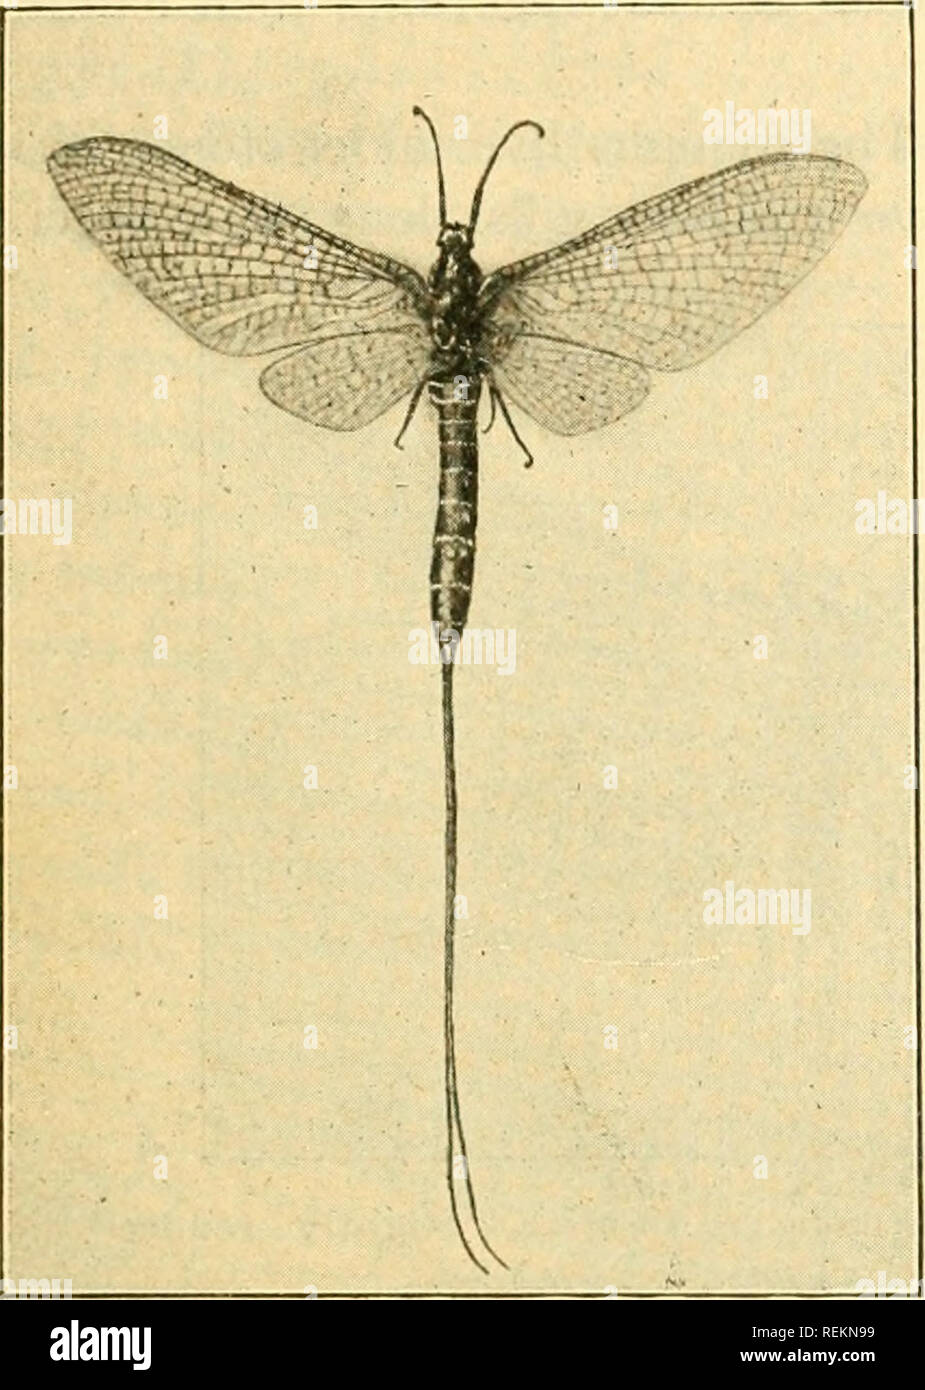 . Class book of economic entomology, with special reference to the economic insects of the northern United States and Canada. Beneficial insects; Insect pests; Insects; Insects. CLASSIFICATION AND DESCRIPTION OF COMMON INSECTS 97 C. Abdomen with 2 or 3 long filaments; lower wings much smaller than upper; antennae short.^—Ephcmcrida (May-flies) (Fig. 53).. CC. Abdomen without jointed filaments; wings about equal in size; antennas short. Odonata (Dragon-flies). The larvae of most of the Neuropteroid insects are aquatic and are of little economic importance in agriculture. They are of importance, Stock Photo